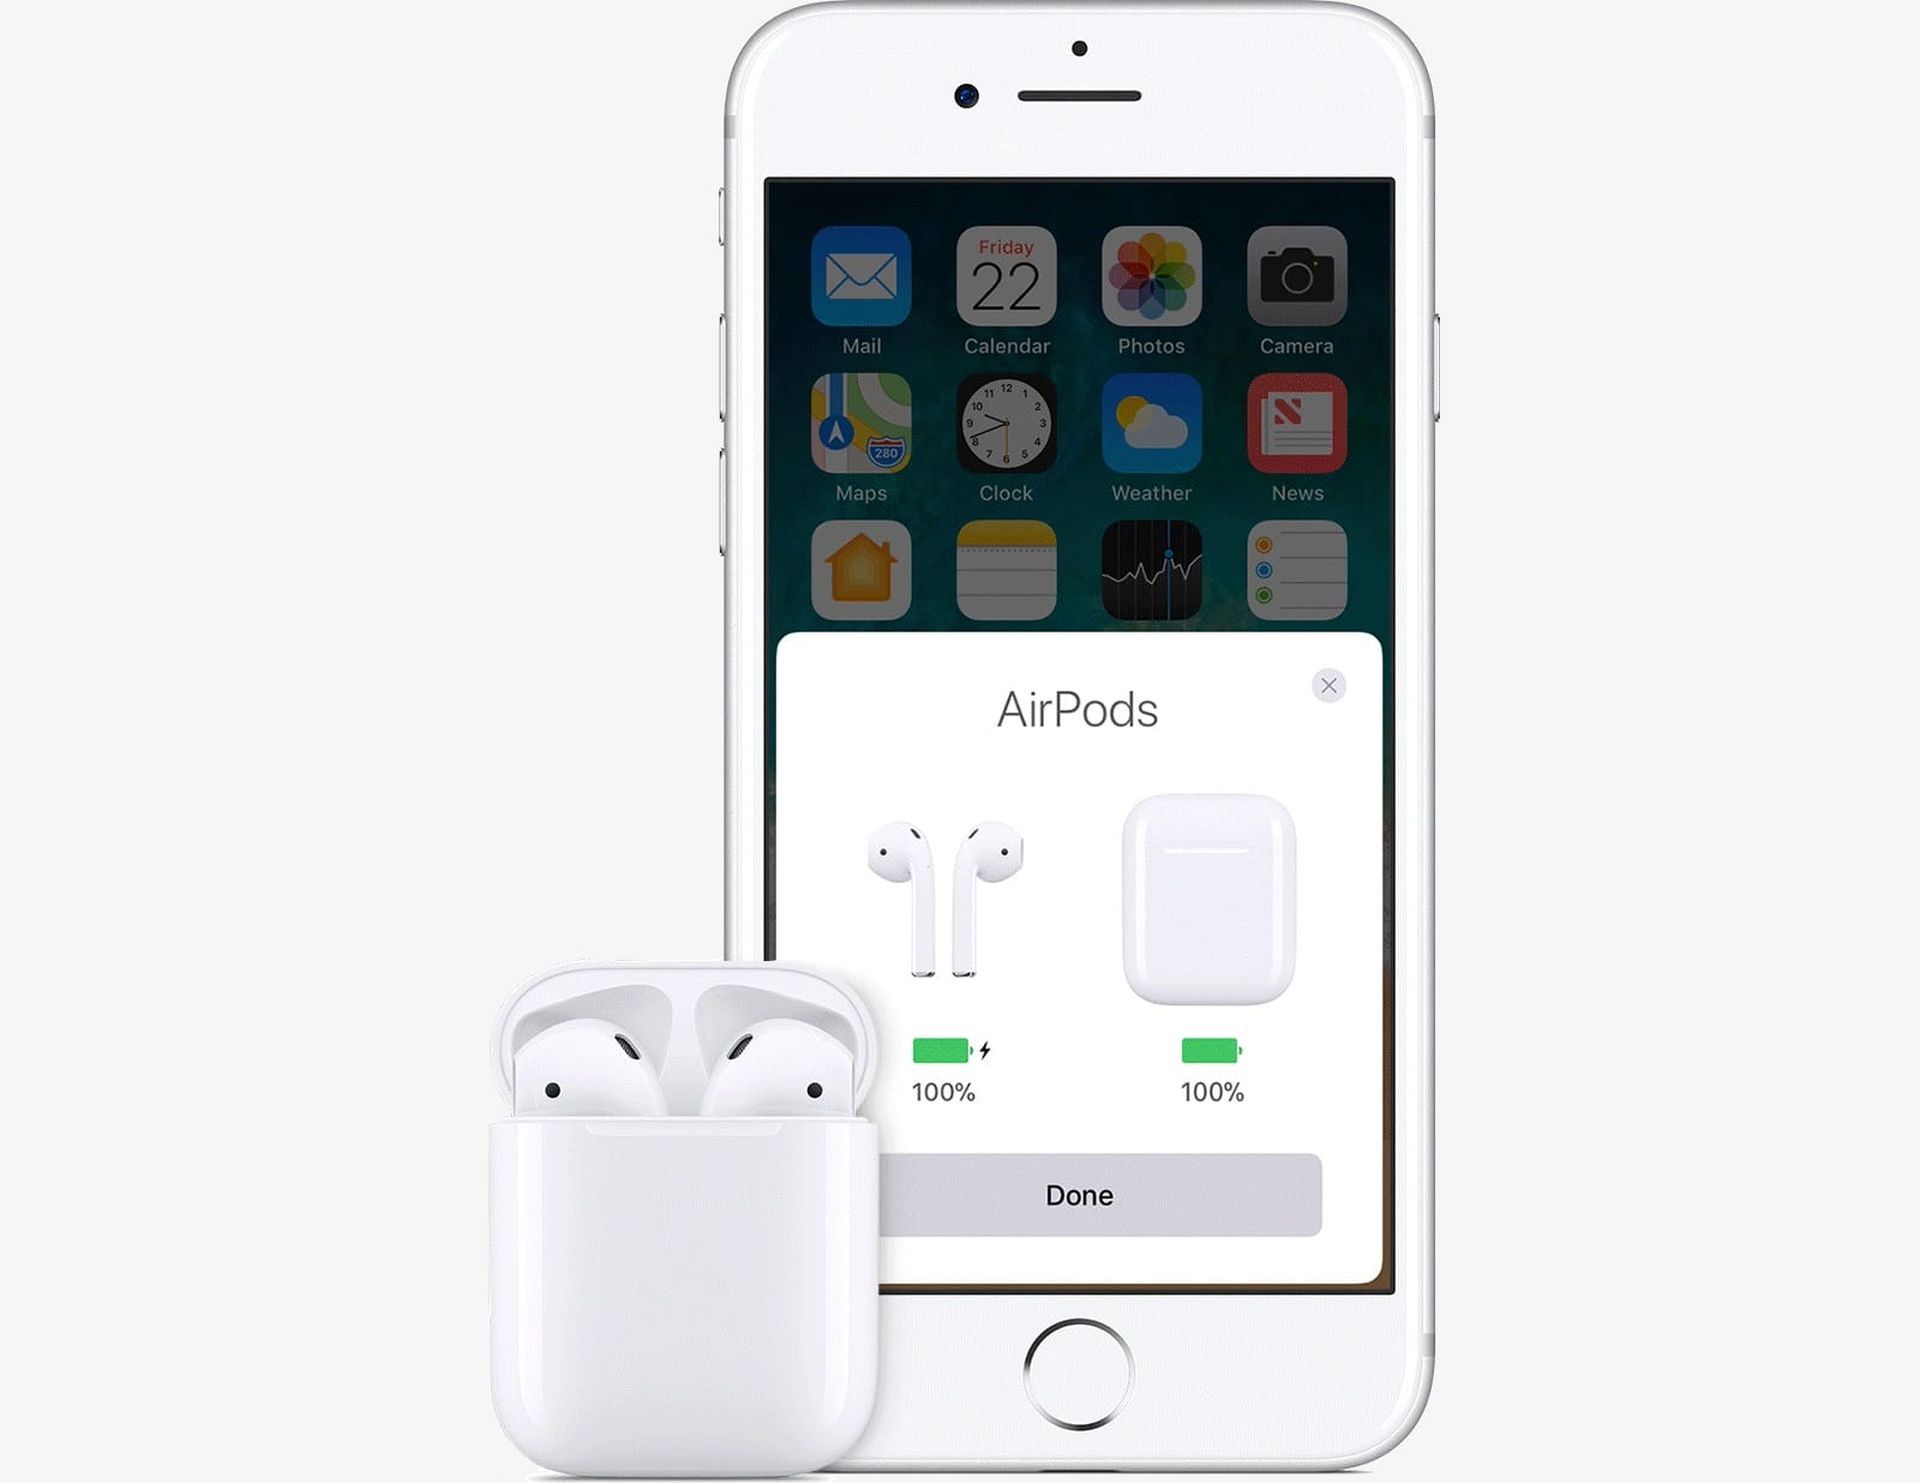 Pairing your AirPods again clears the cache of the device so it might help you resolve AirPods stuttering